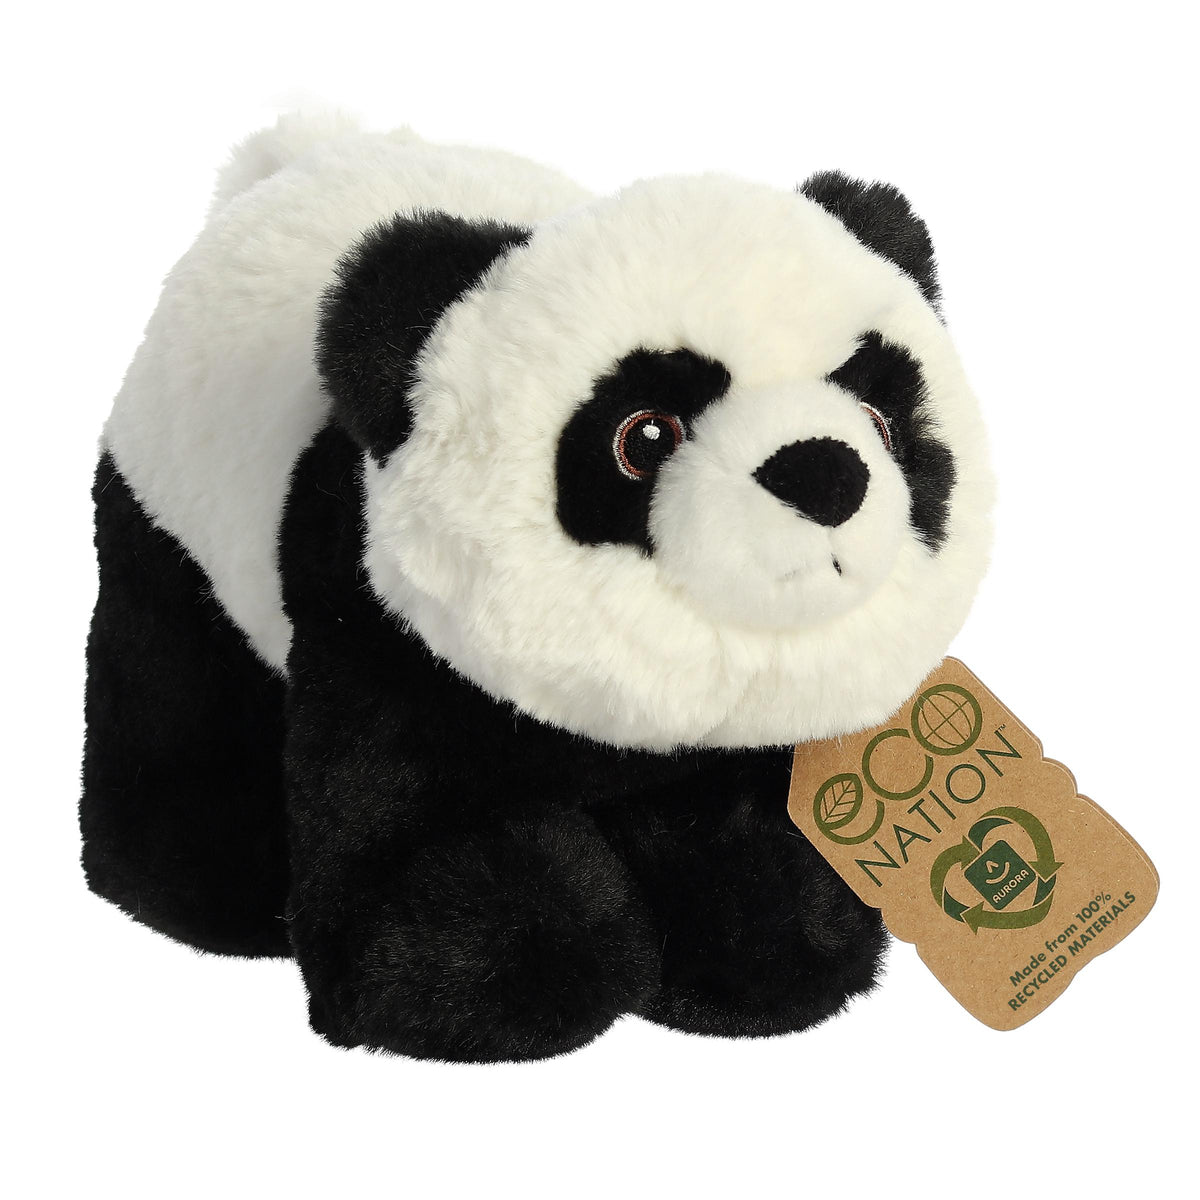 A huggable panda plush with a white and black coat, embroidered eyes, and an eco-nation tag around its neck